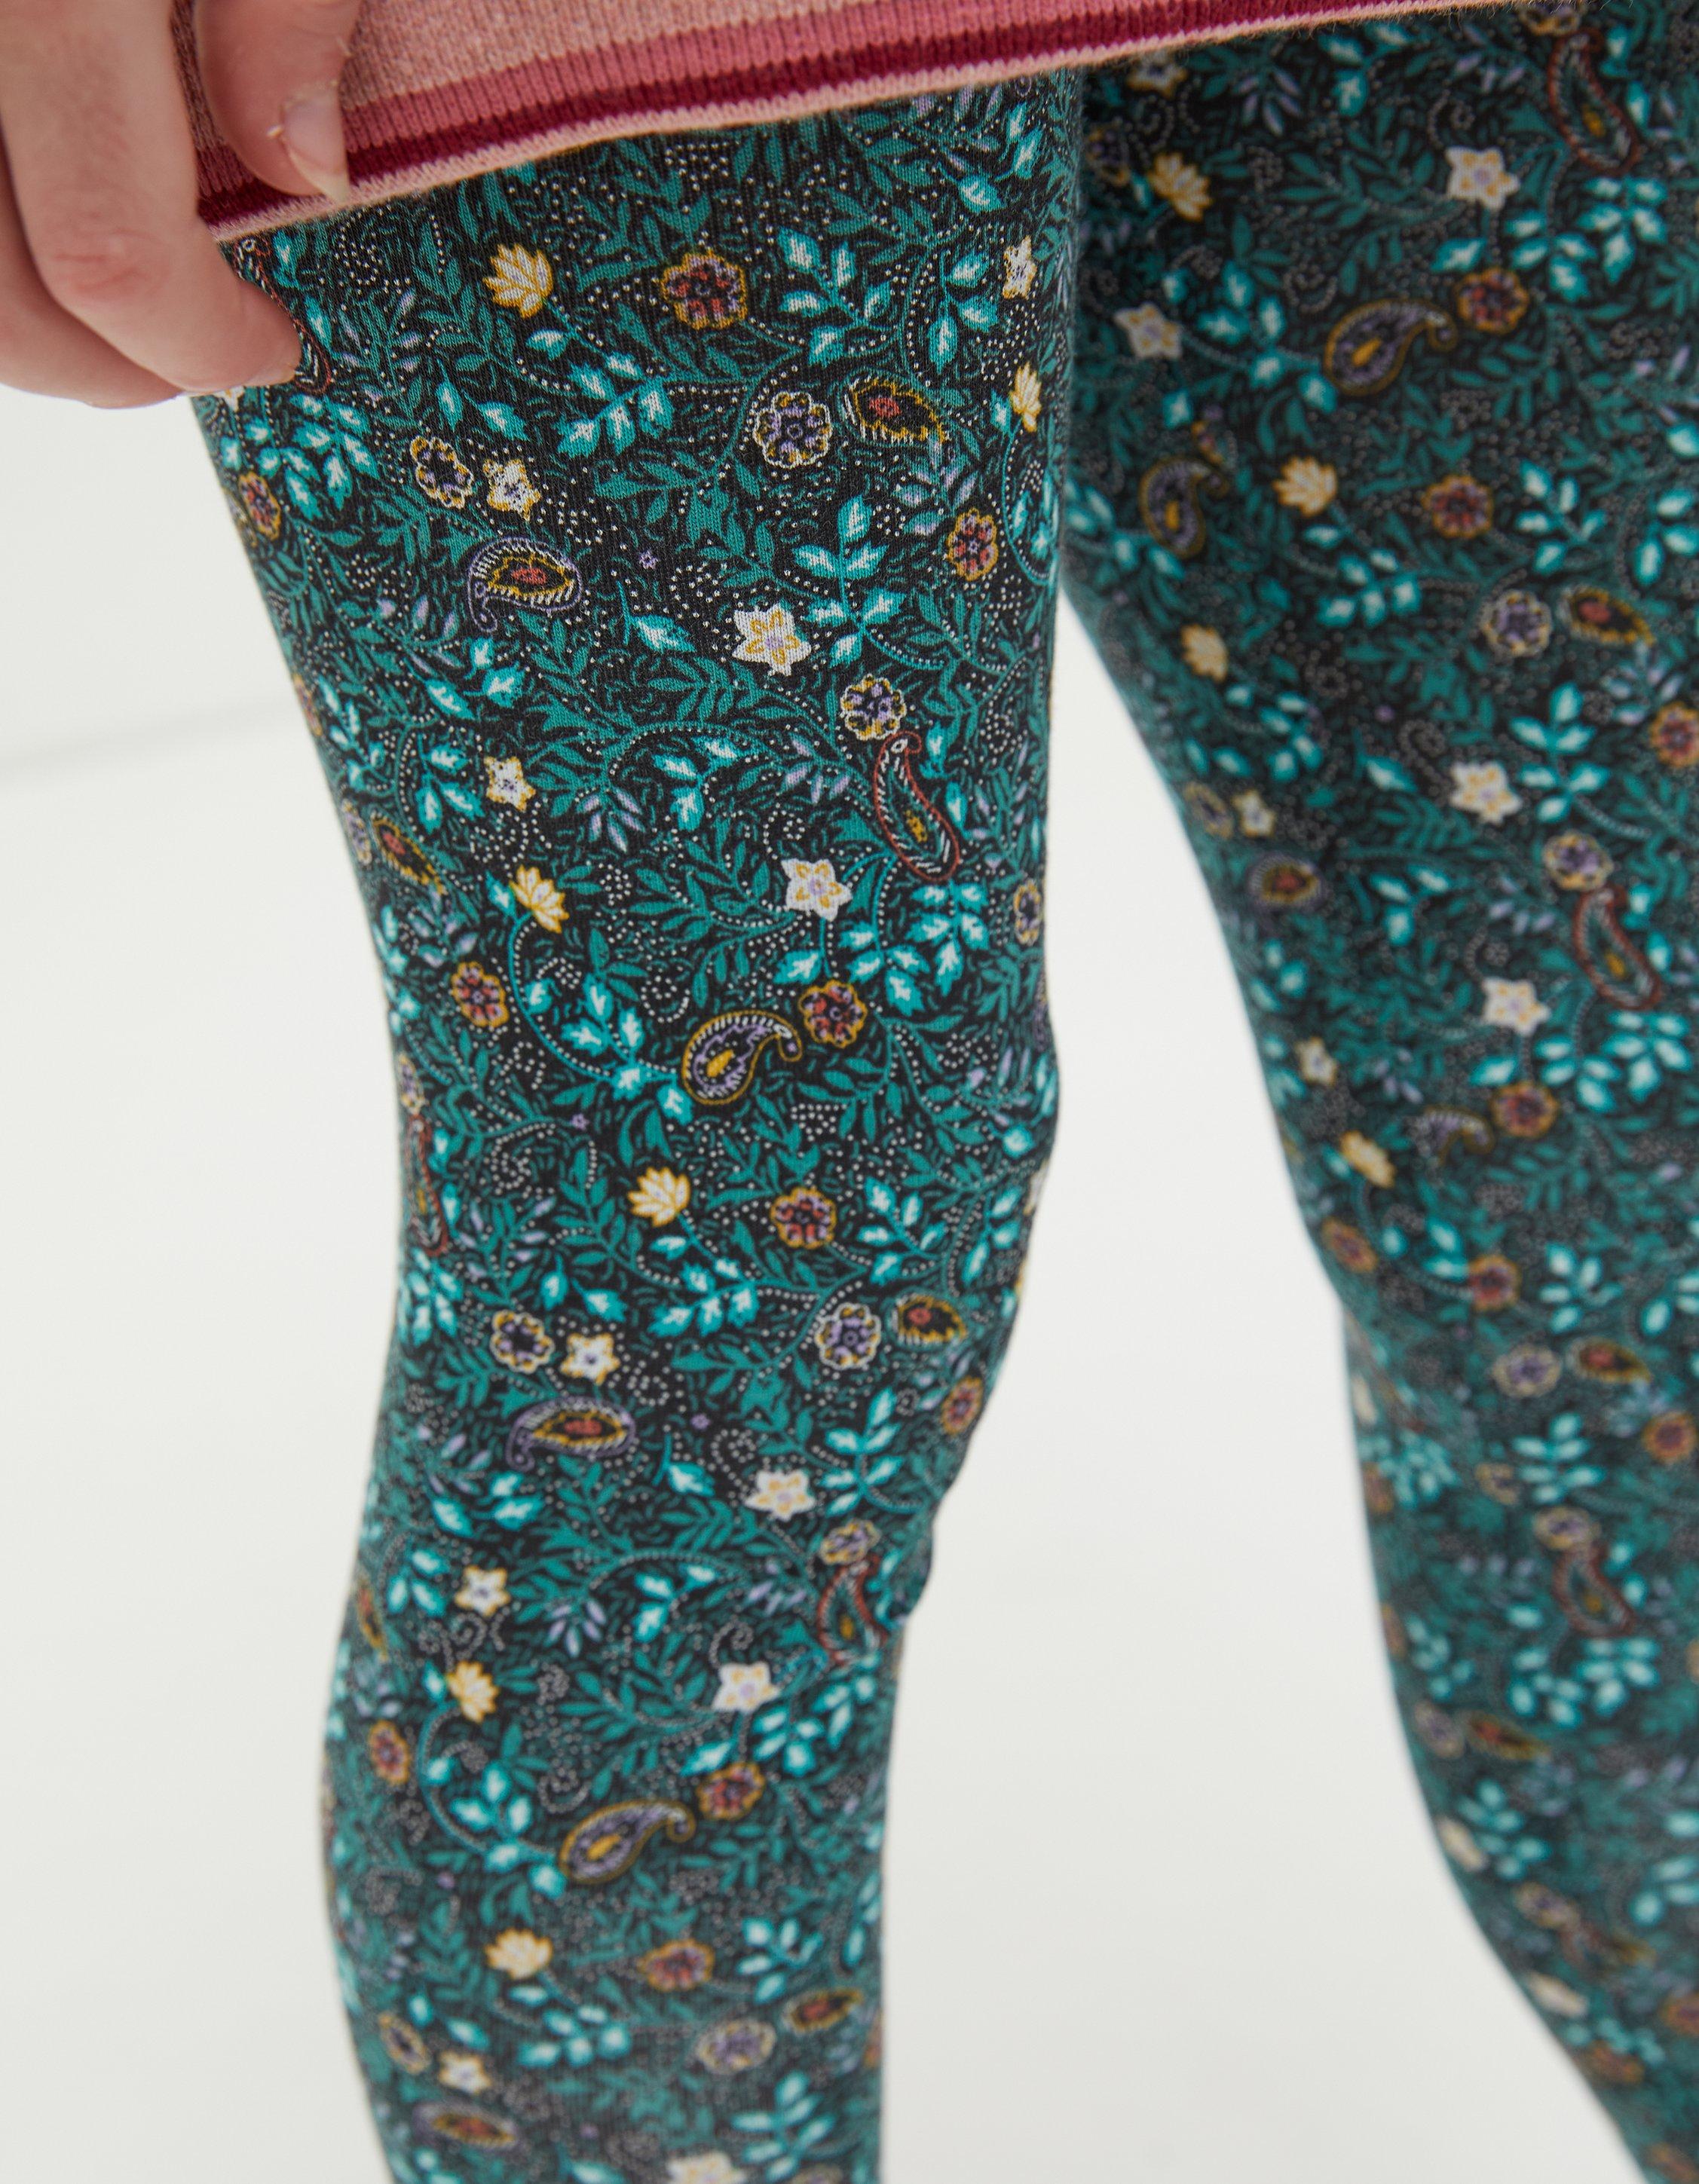 Two-Pack Spring Floral Leggings, FatFace.com